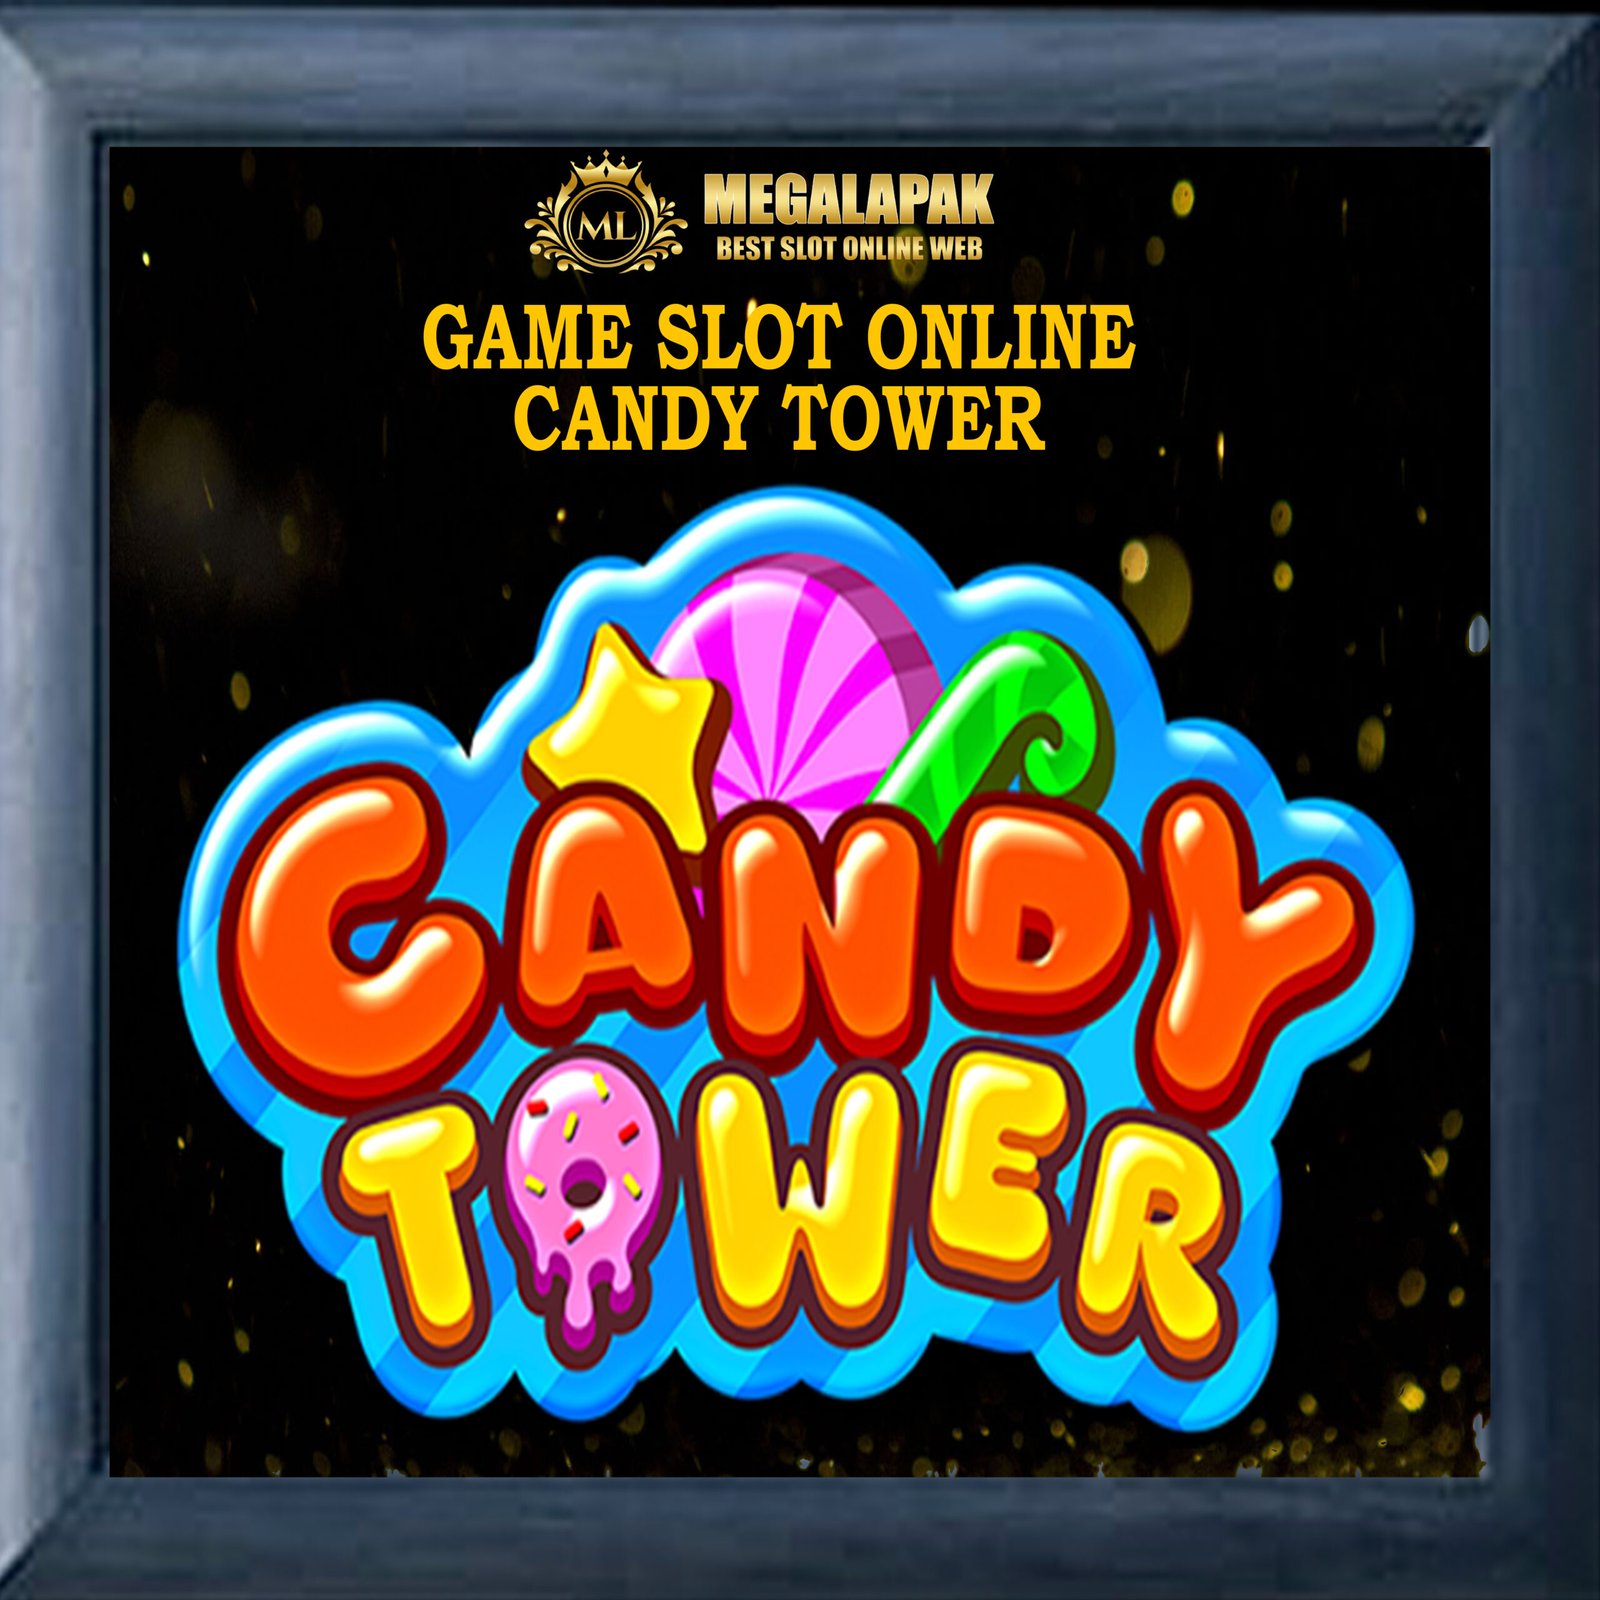 Slot Online Candy Tower Megalapak